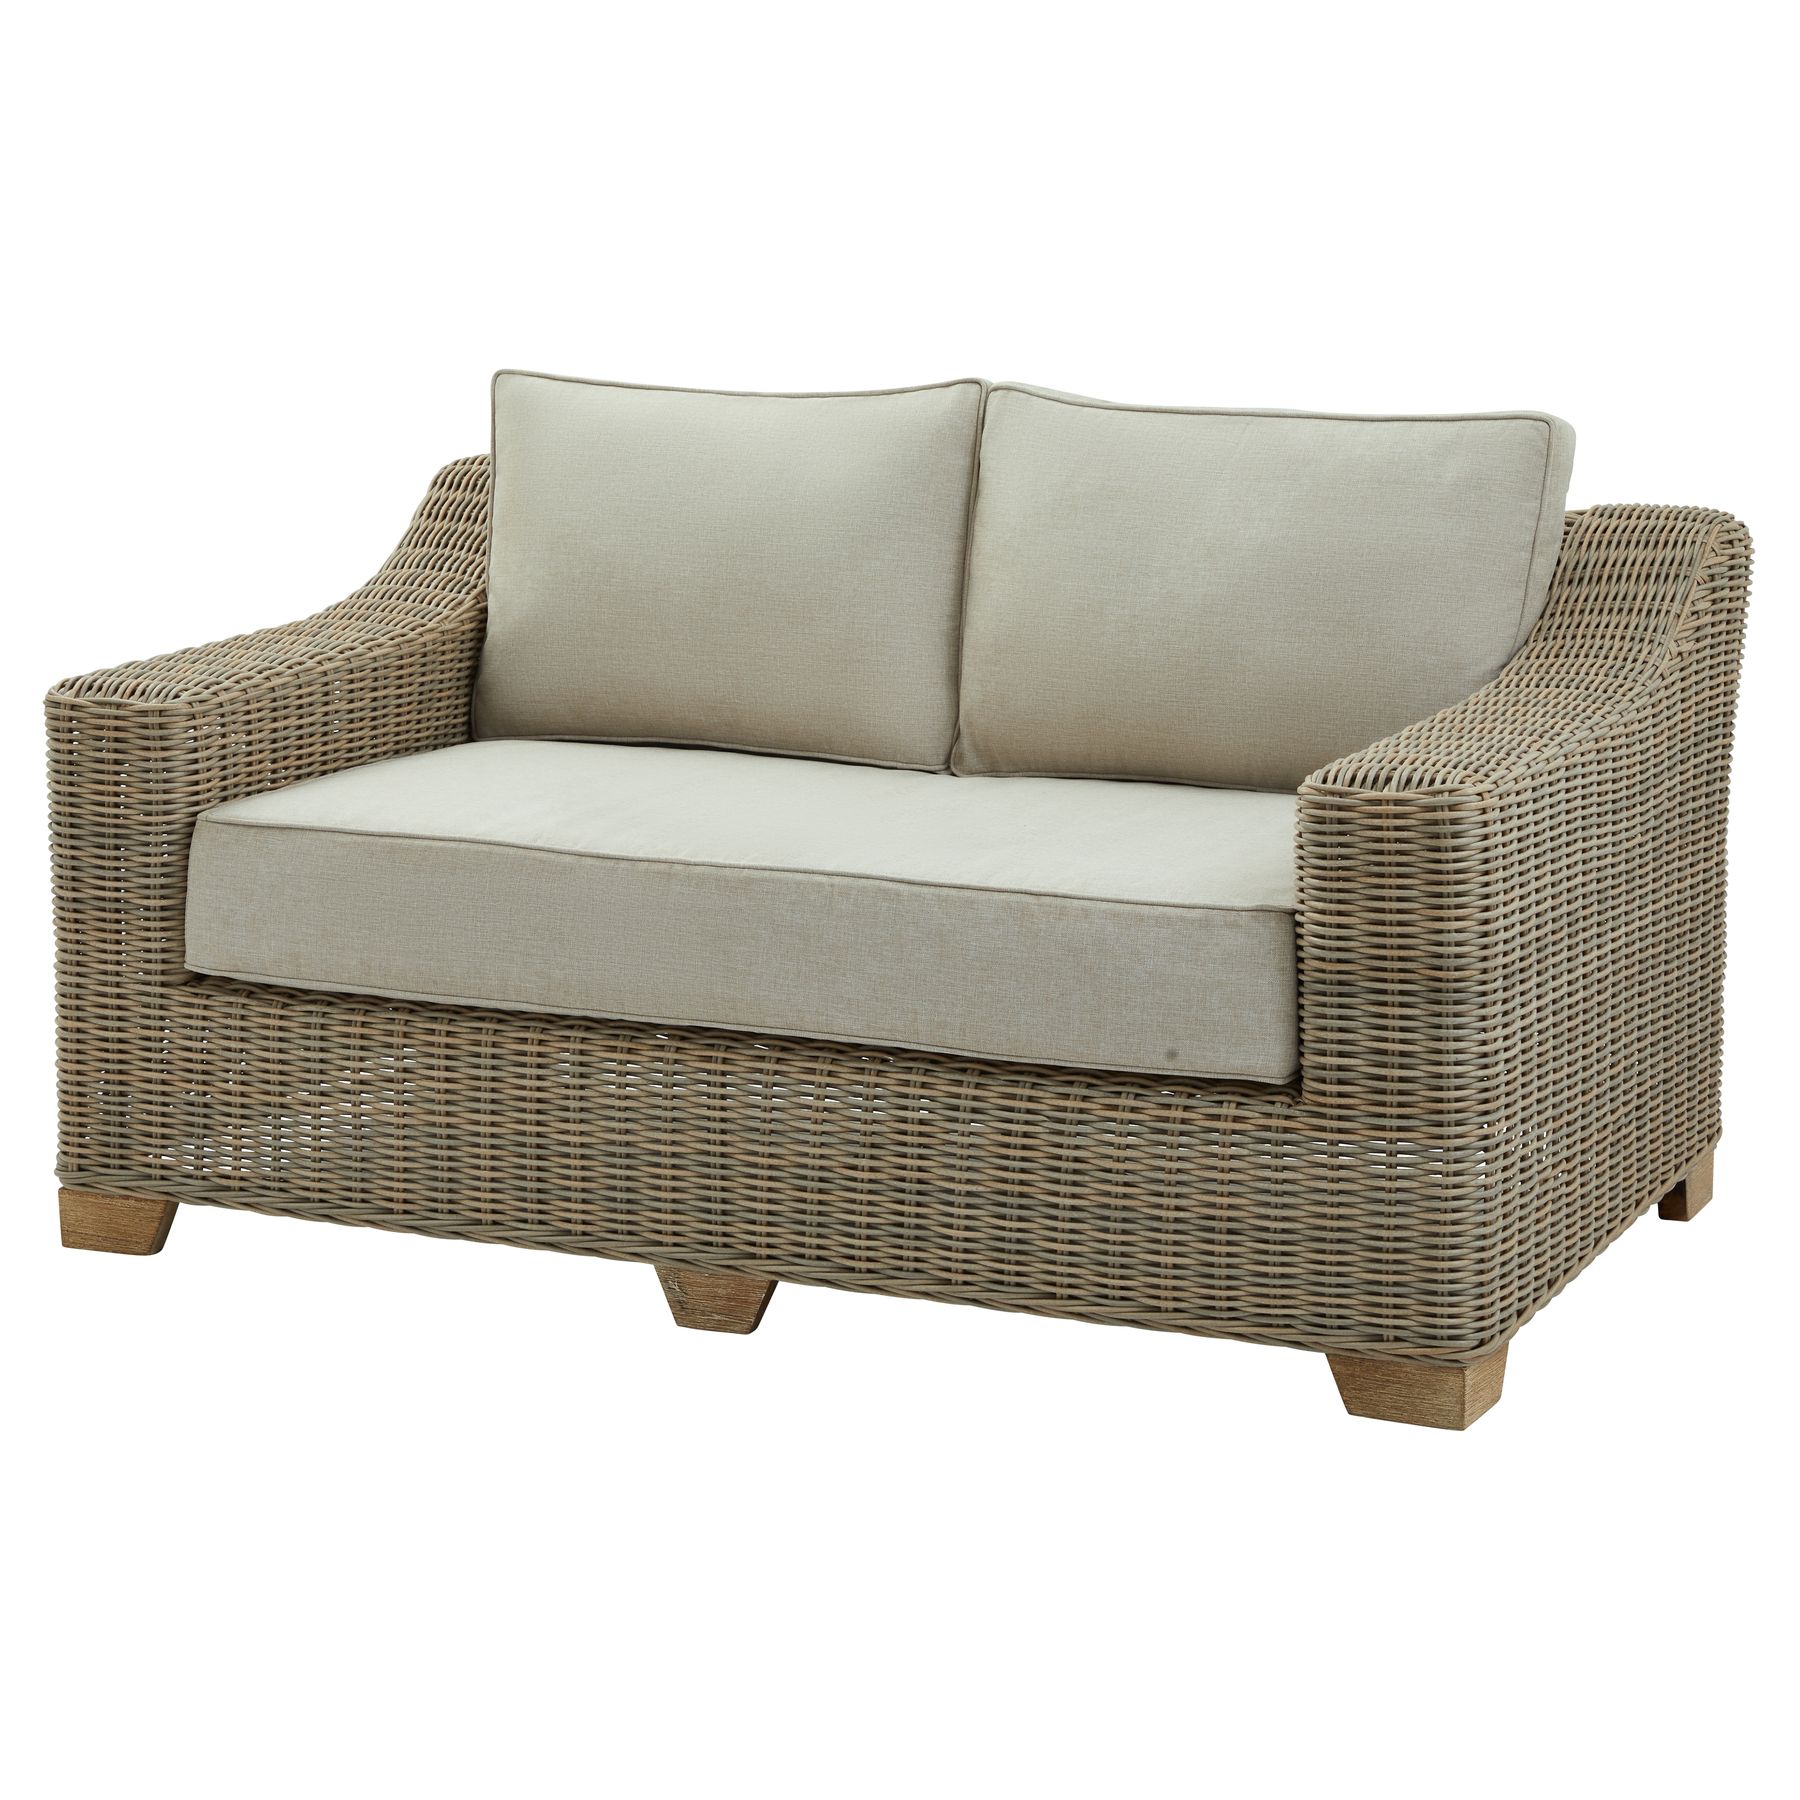 Capri Collection Outdoor Two Seater Sofa - Image 1